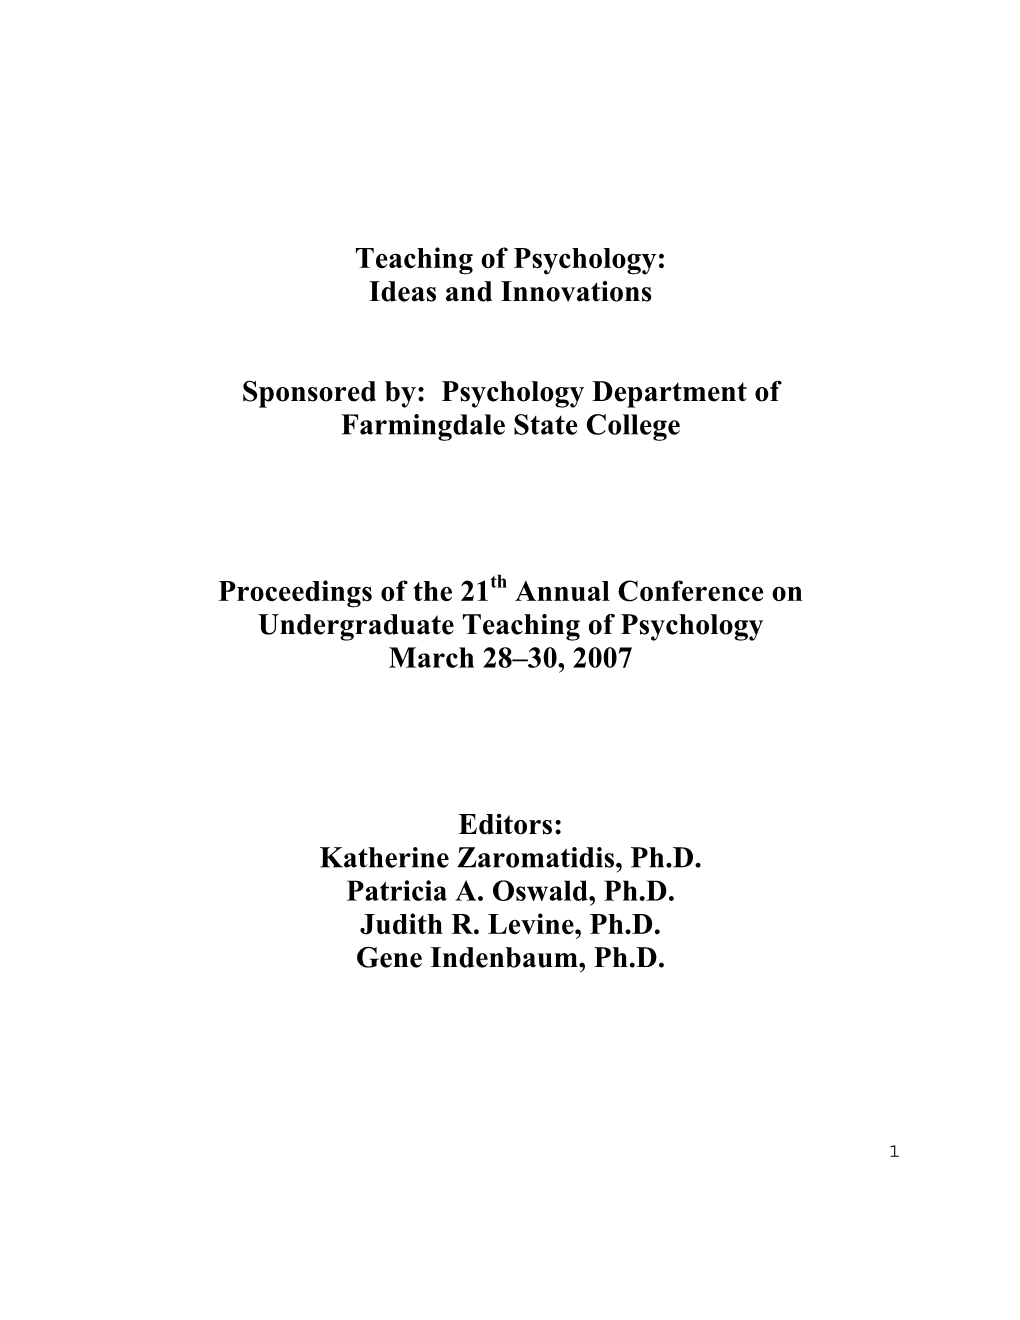 Teaching of Psychology: Ideas and Innovations. Proceedings of the Annual Conference on Undergraduate Teaching of Psychology (21St, Kerhonkson, New York, March 28-30, 2007)